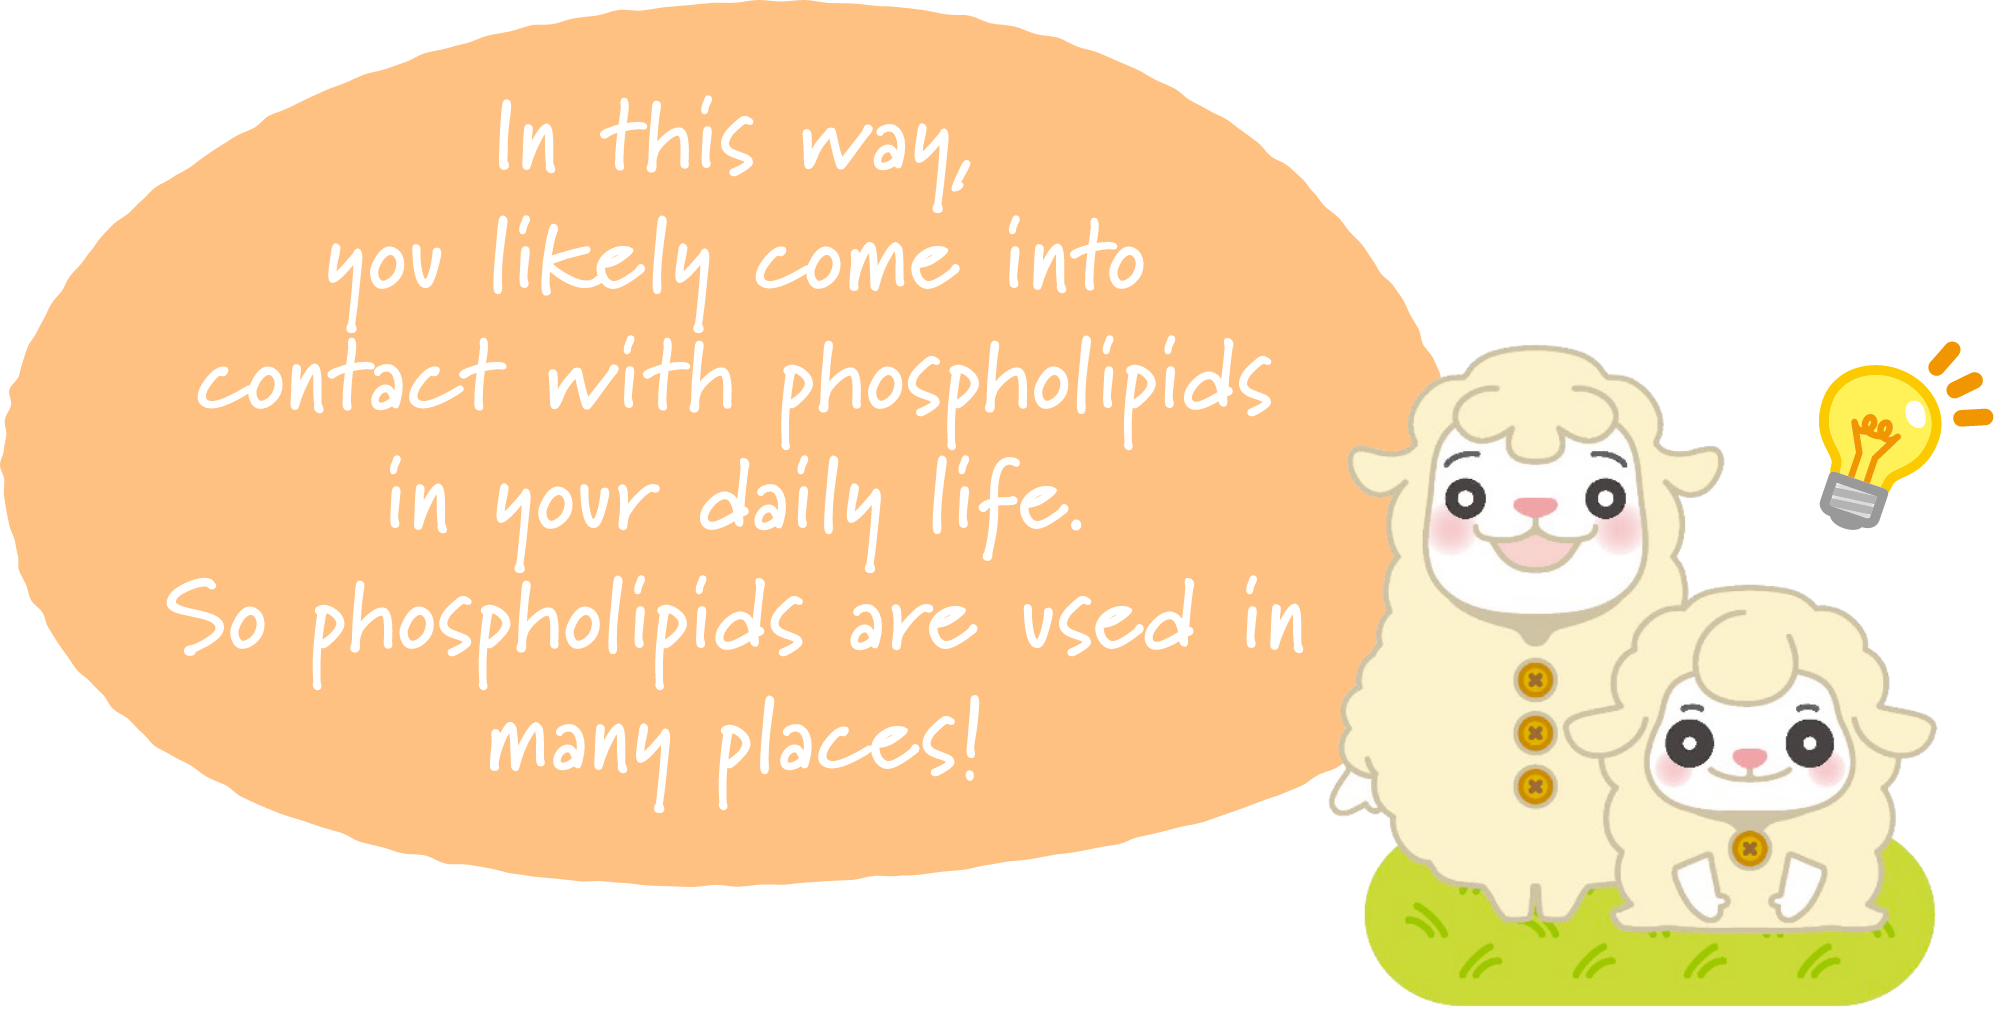 In this way, you likely come into contact with phospholipids in your daily life.So phospholipids are used in many places!